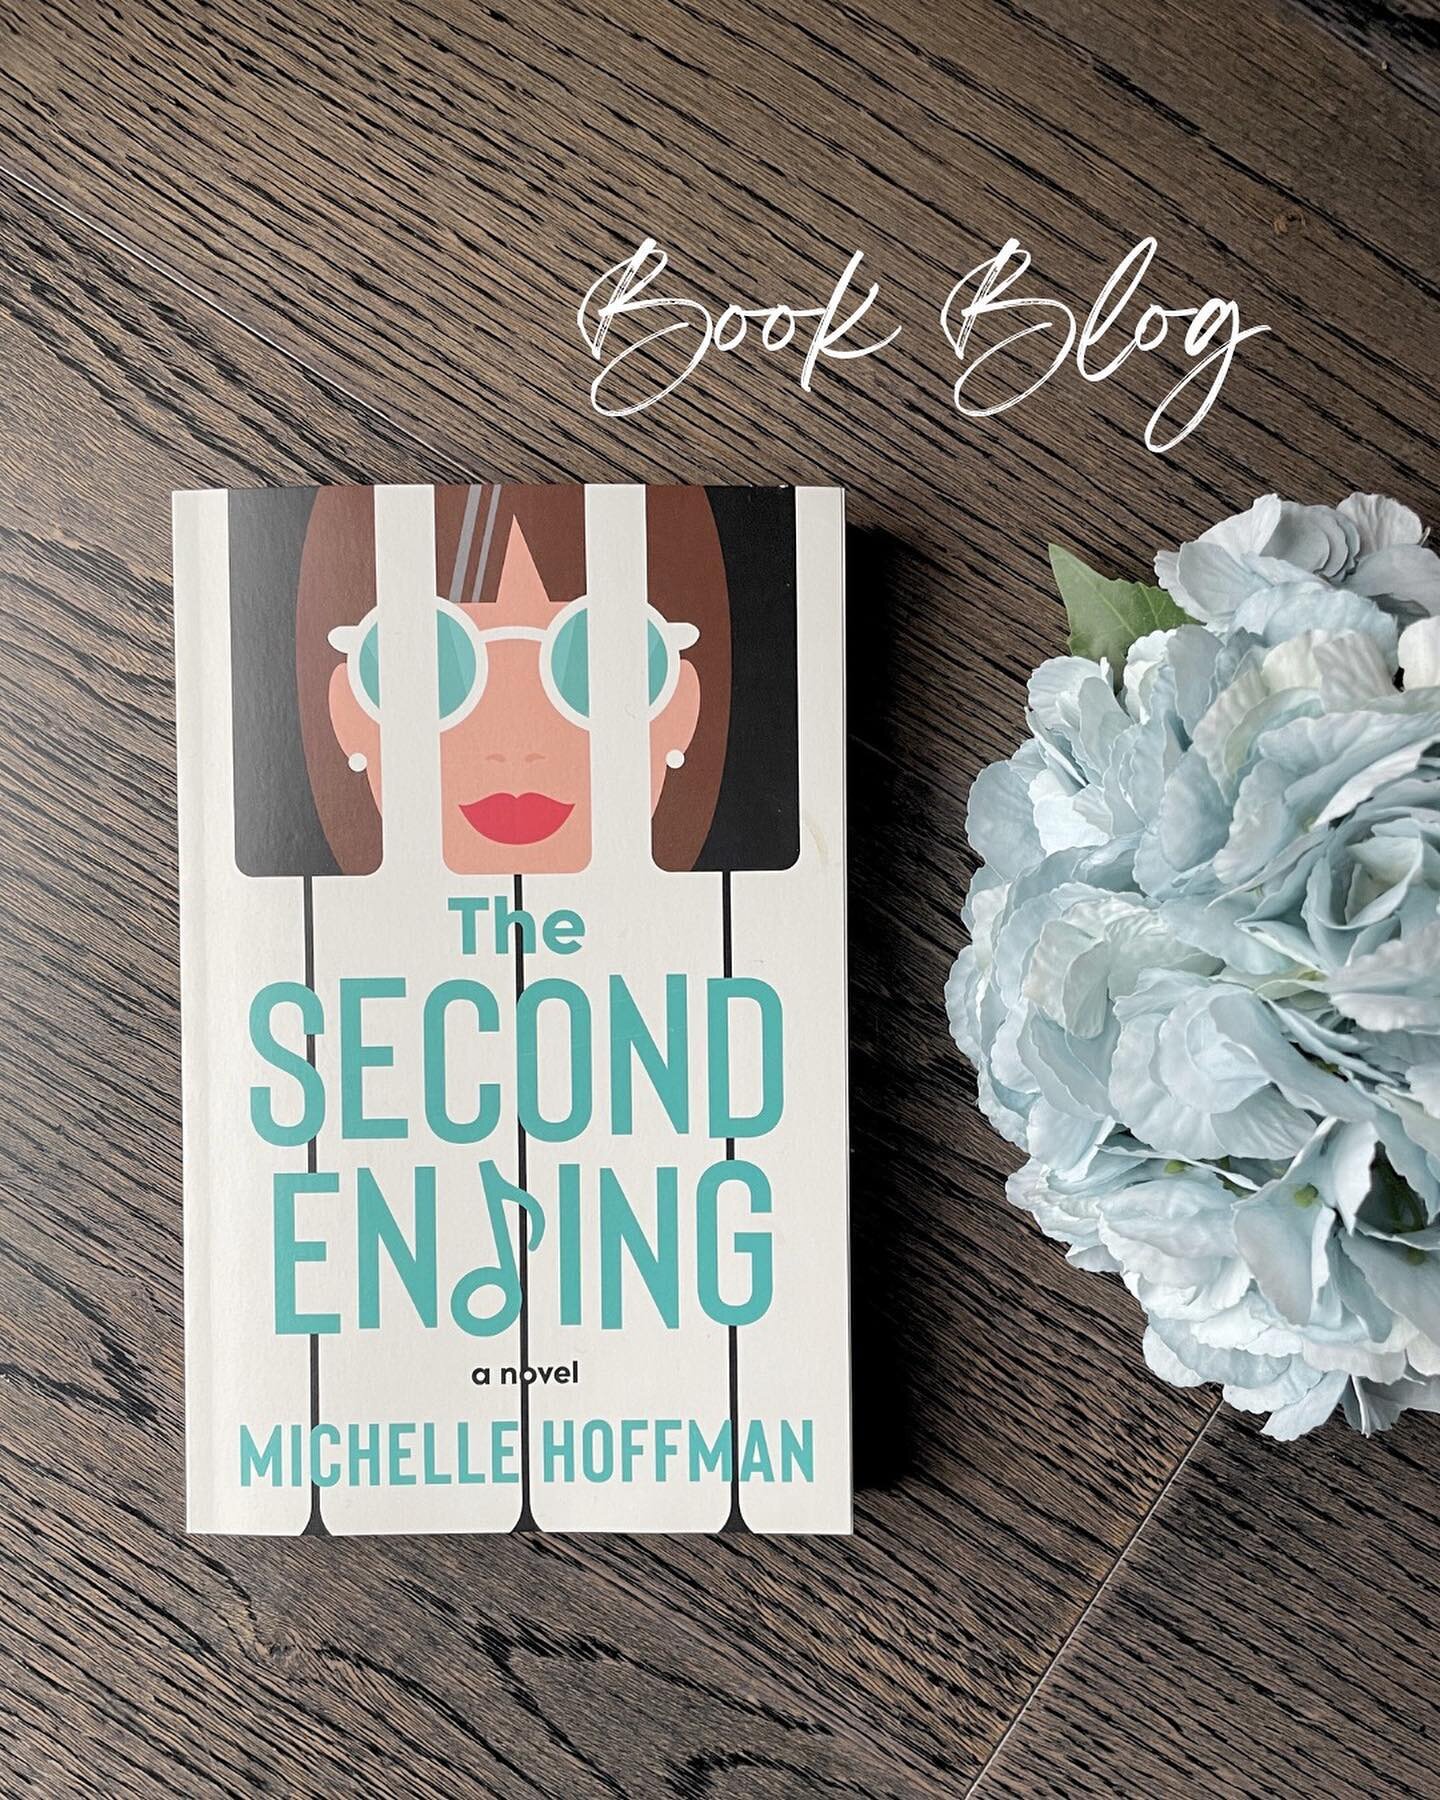 Yesterday was World Piano Day, celebrated on the 88th day of the year! If you&rsquo;re ever looking for good books about pianists, I would fully recommend The Second Ending by Michelle Hoffman. This incredible debut novel beautifully details the ups 